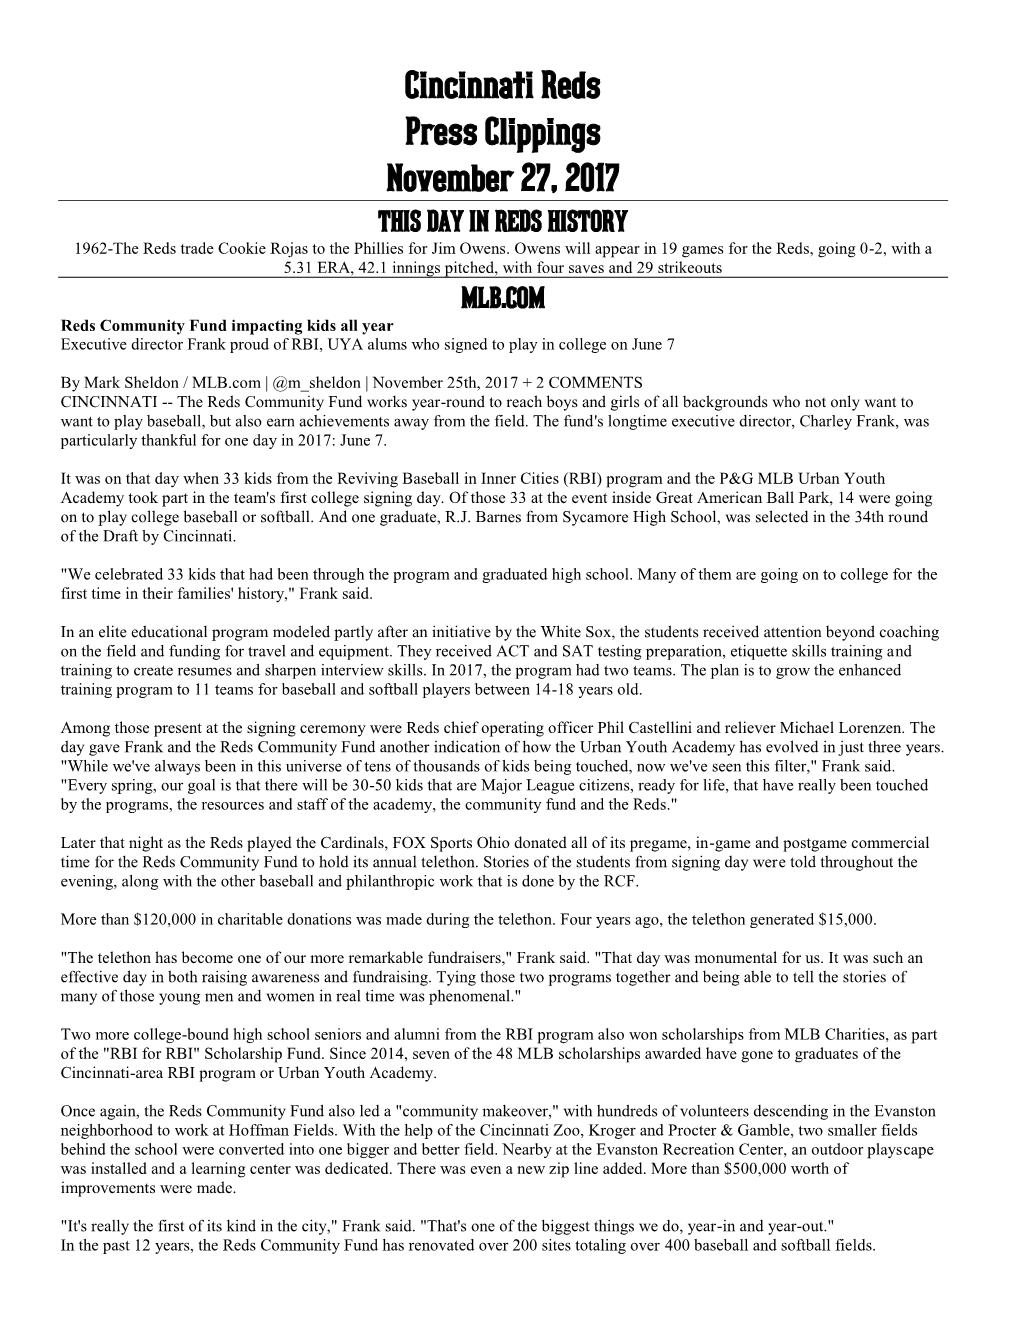 Cincinnati Reds Press Clippings November 27, 2017 THIS DAY in REDS HISTORY 1962-The Reds Trade Cookie Rojas to the Phillies for Jim Owens